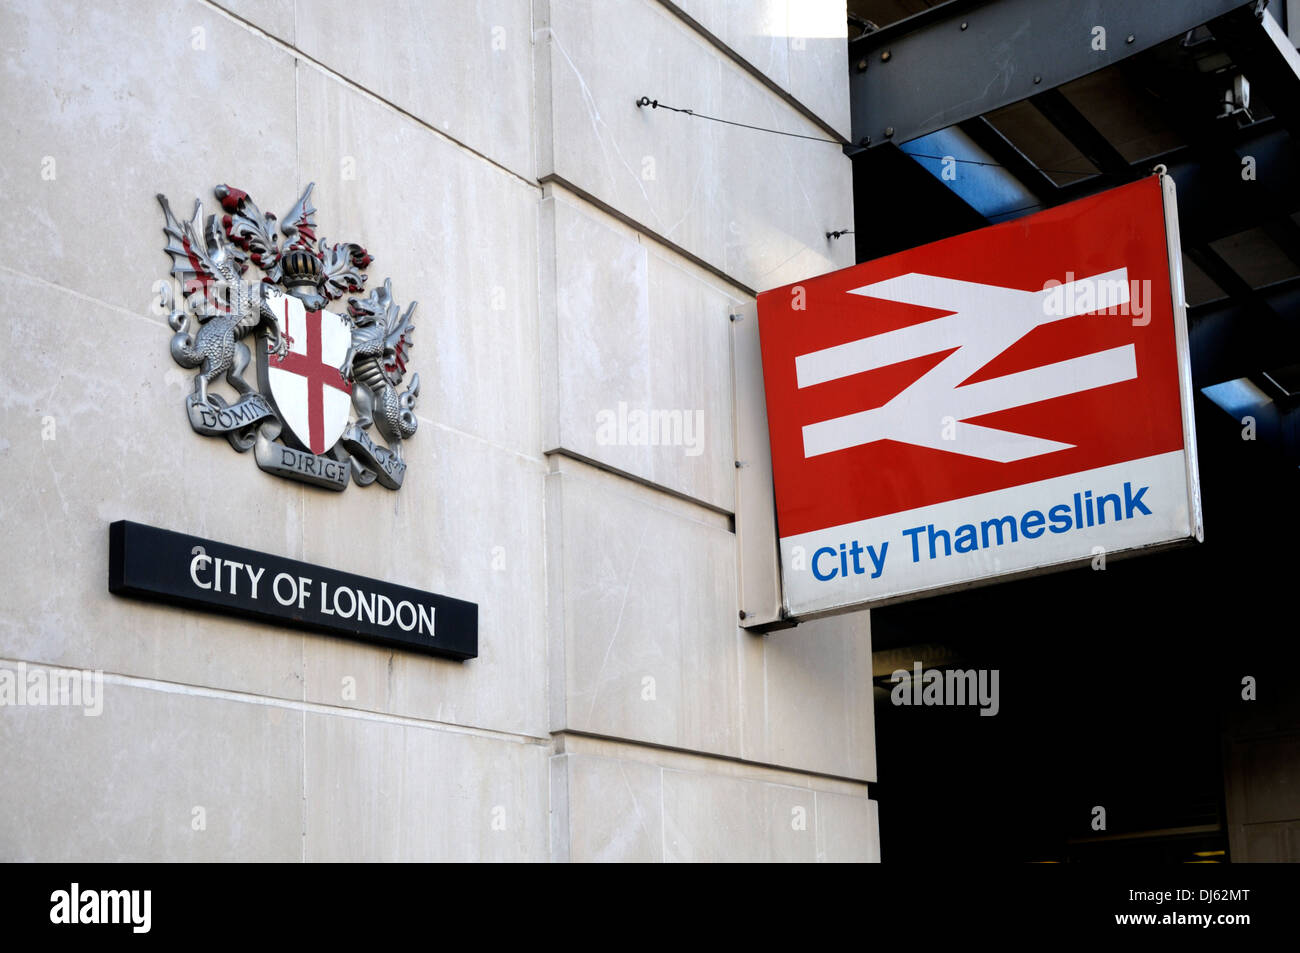 Londres, Angleterre, Royaume-Uni. Ludgate Circus City station Thameslink Banque D'Images